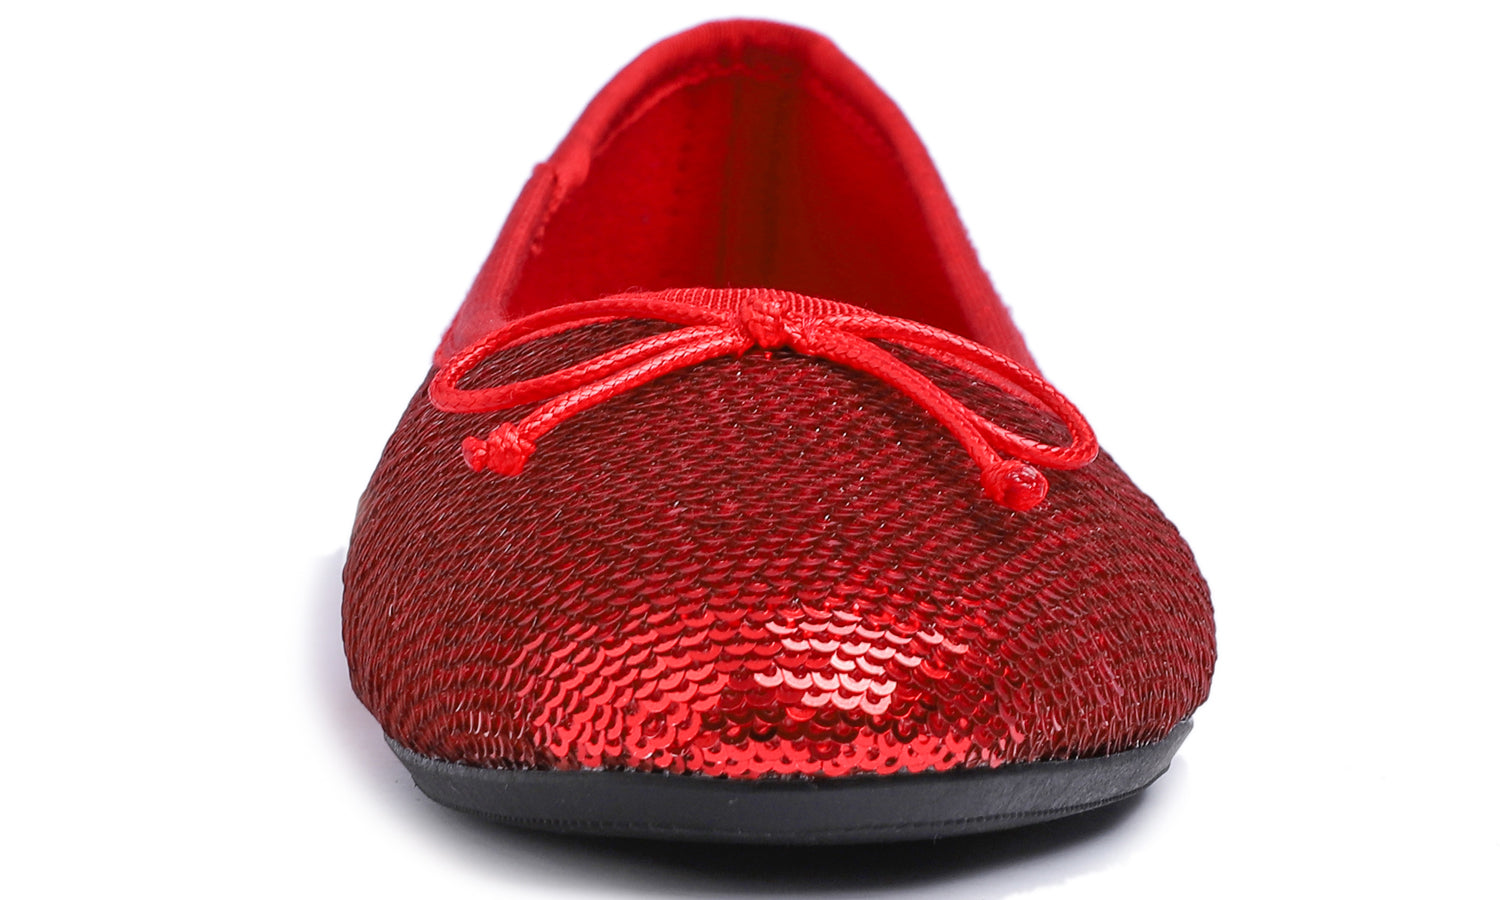 Feversole Women's Sparkle Memory Foam Cushioned Colorful Shiny Ballet Flats Red Sequin